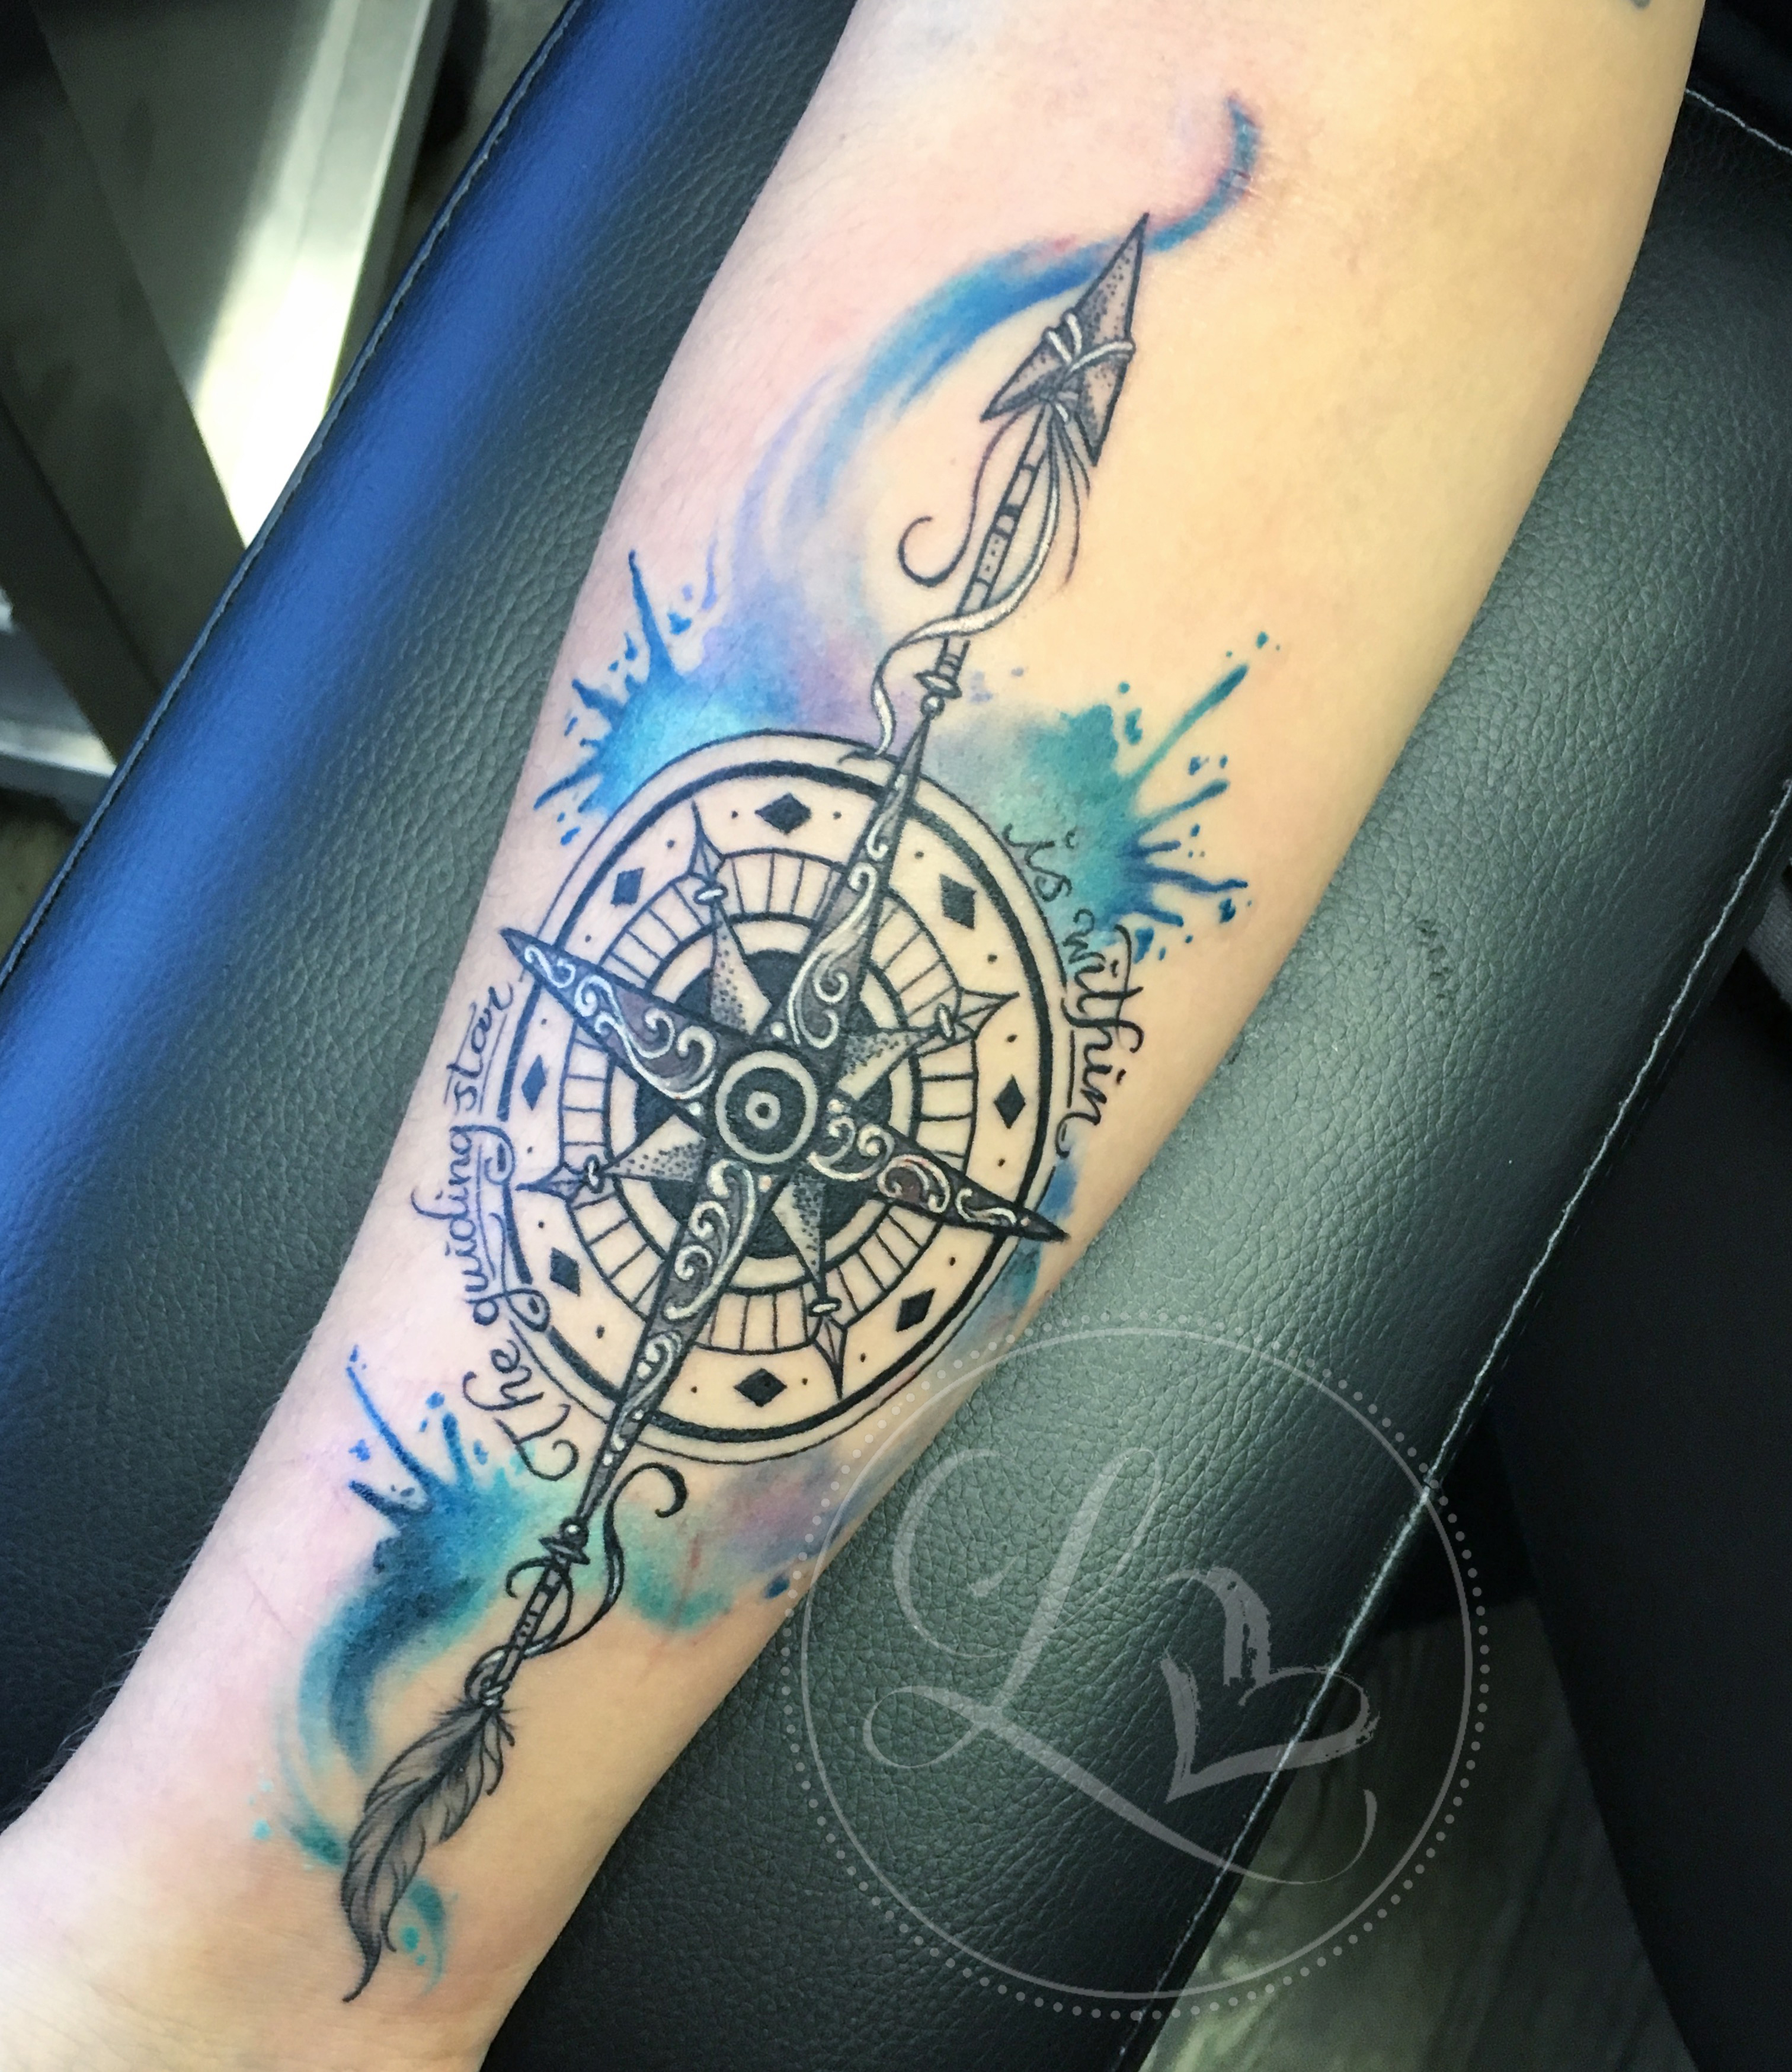 Watercolor style tattoo with an intricate detailed dotwork compass and arrow